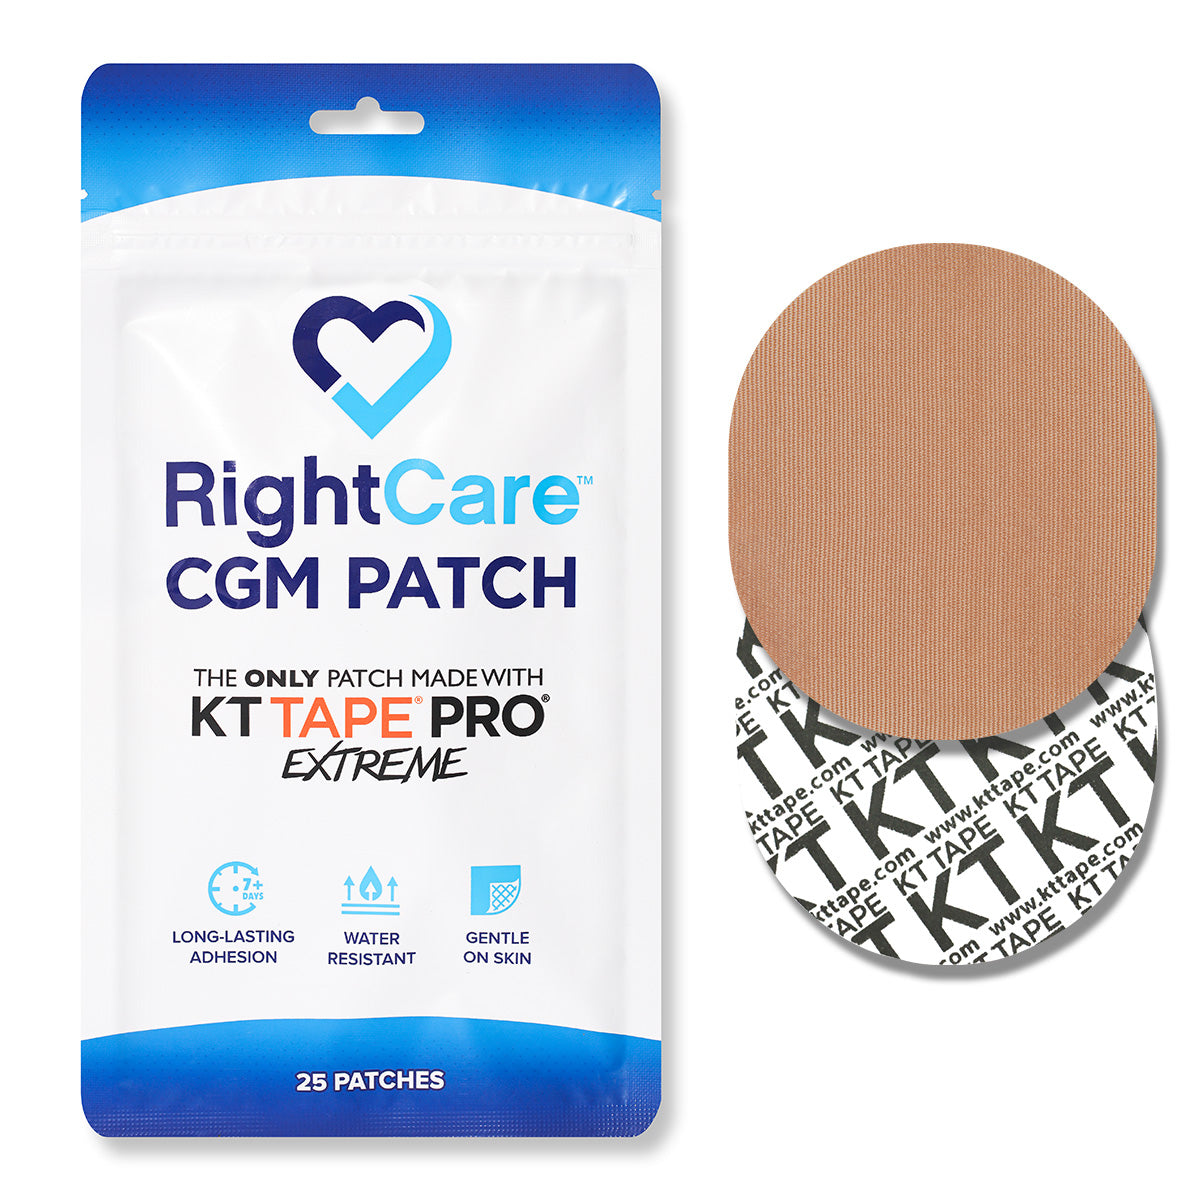 RightCare CGM Adhesive Patch made with KT Tape, Universal, Bag of 25 11699145